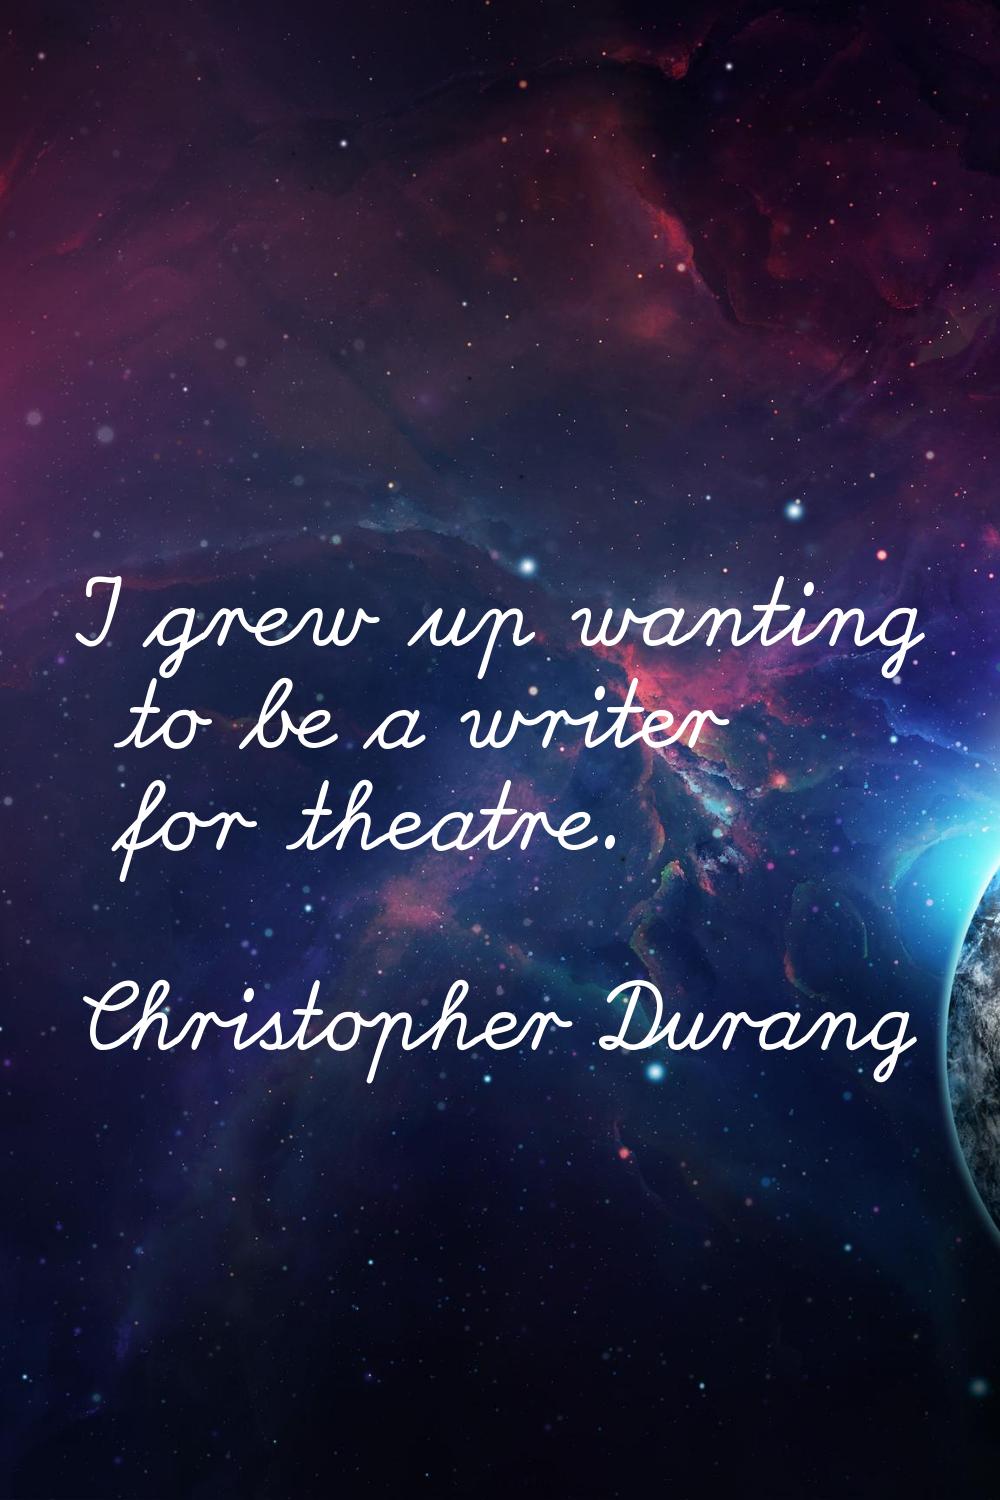 I grew up wanting to be a writer for theatre.